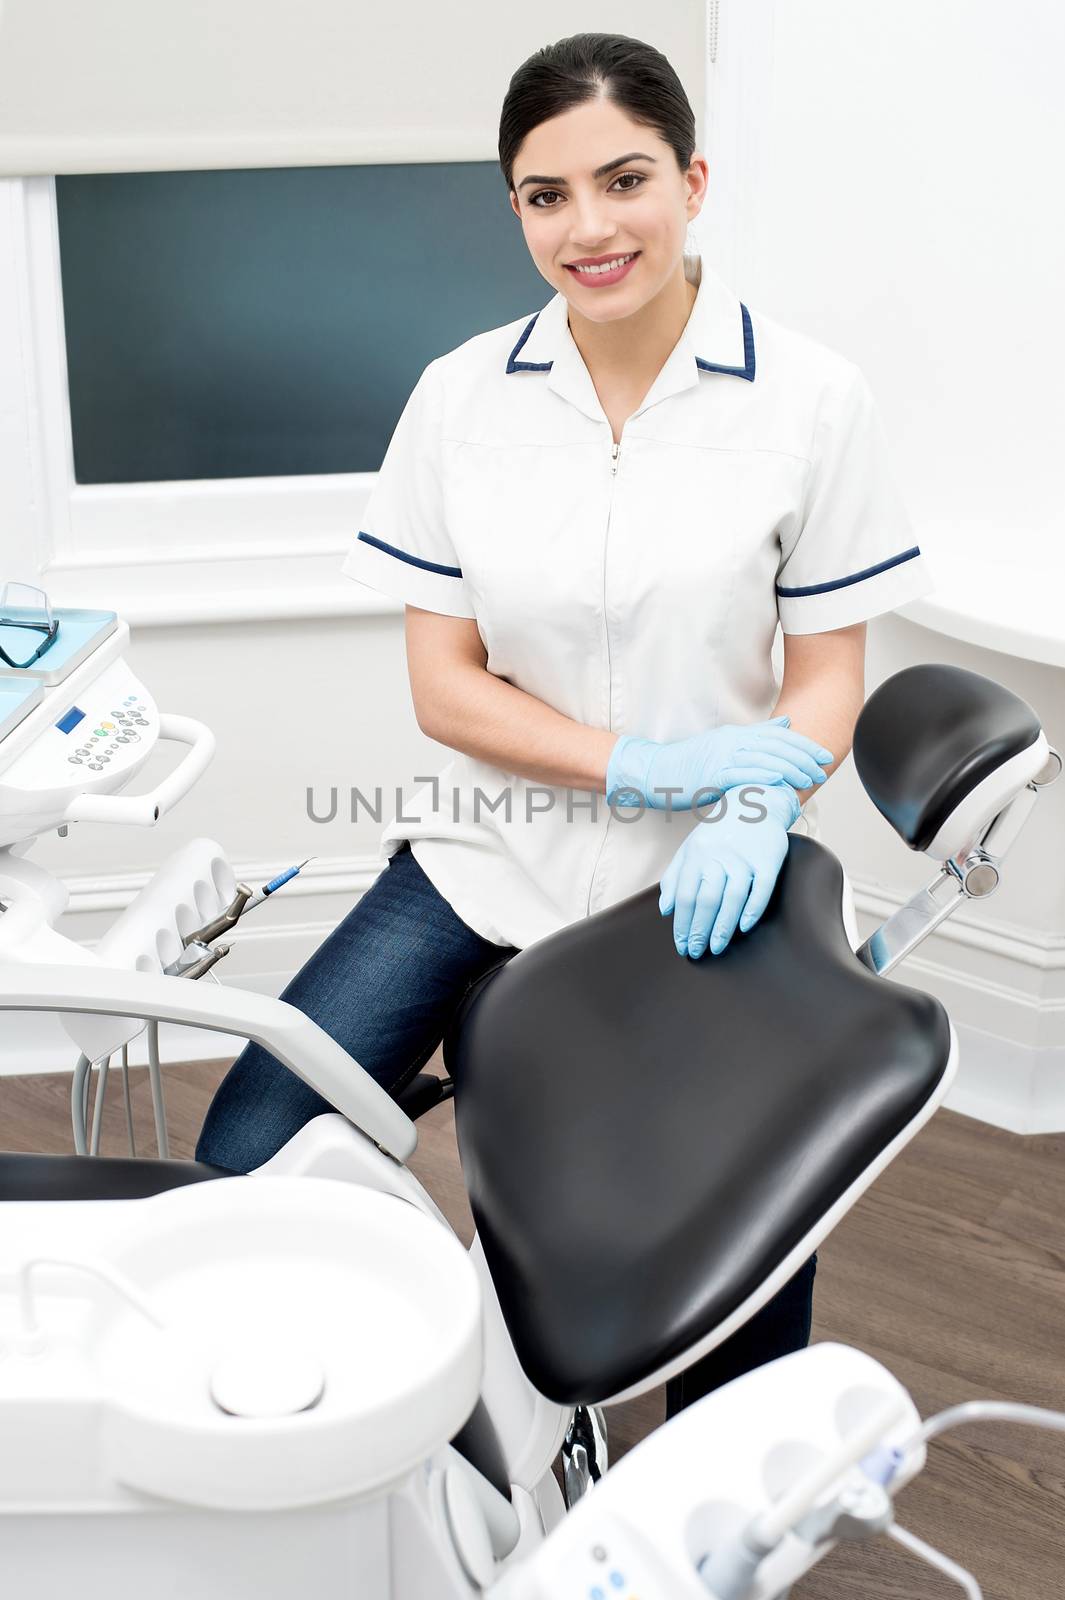 Welcome to our dental clinic by stockyimages